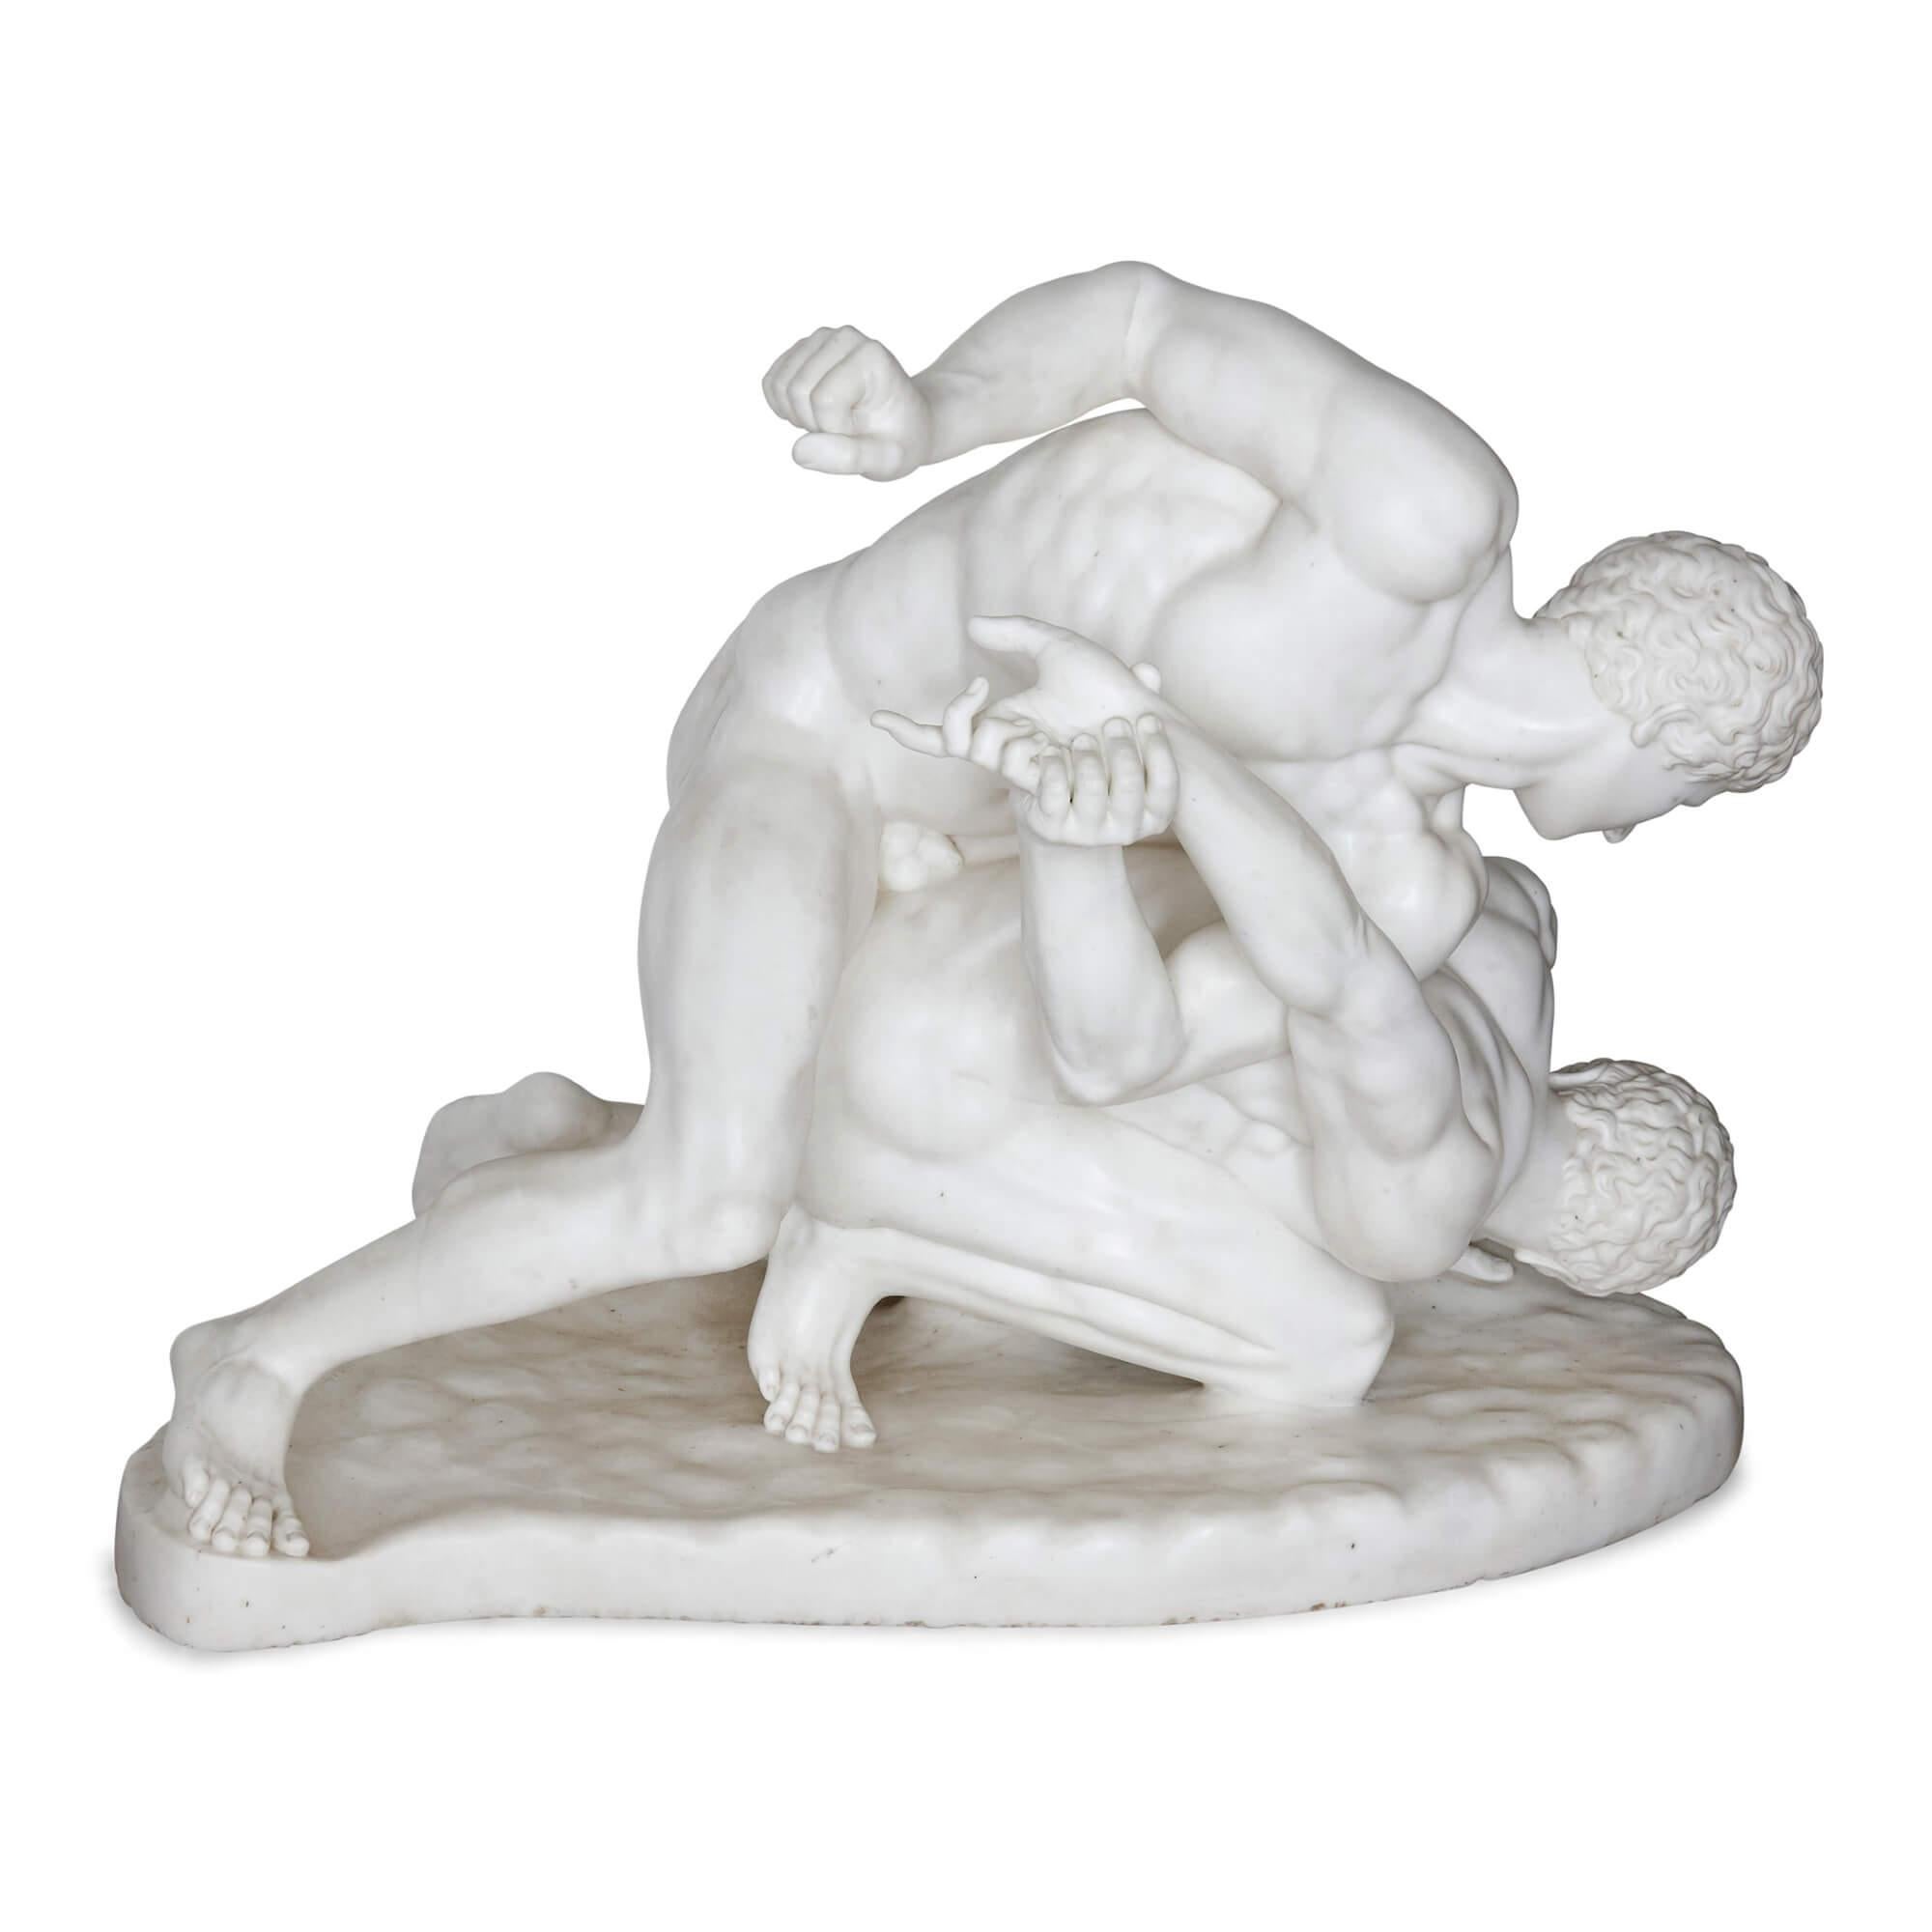 Antique Italian marble sculpture after Roman original of the Wrestlers
Italian, late 19th century
Measures: Height 94cm, width 124cm, depth 68cm

This fine sculpture is carved from a single piece is lustrous white marble. The sculpture depicts